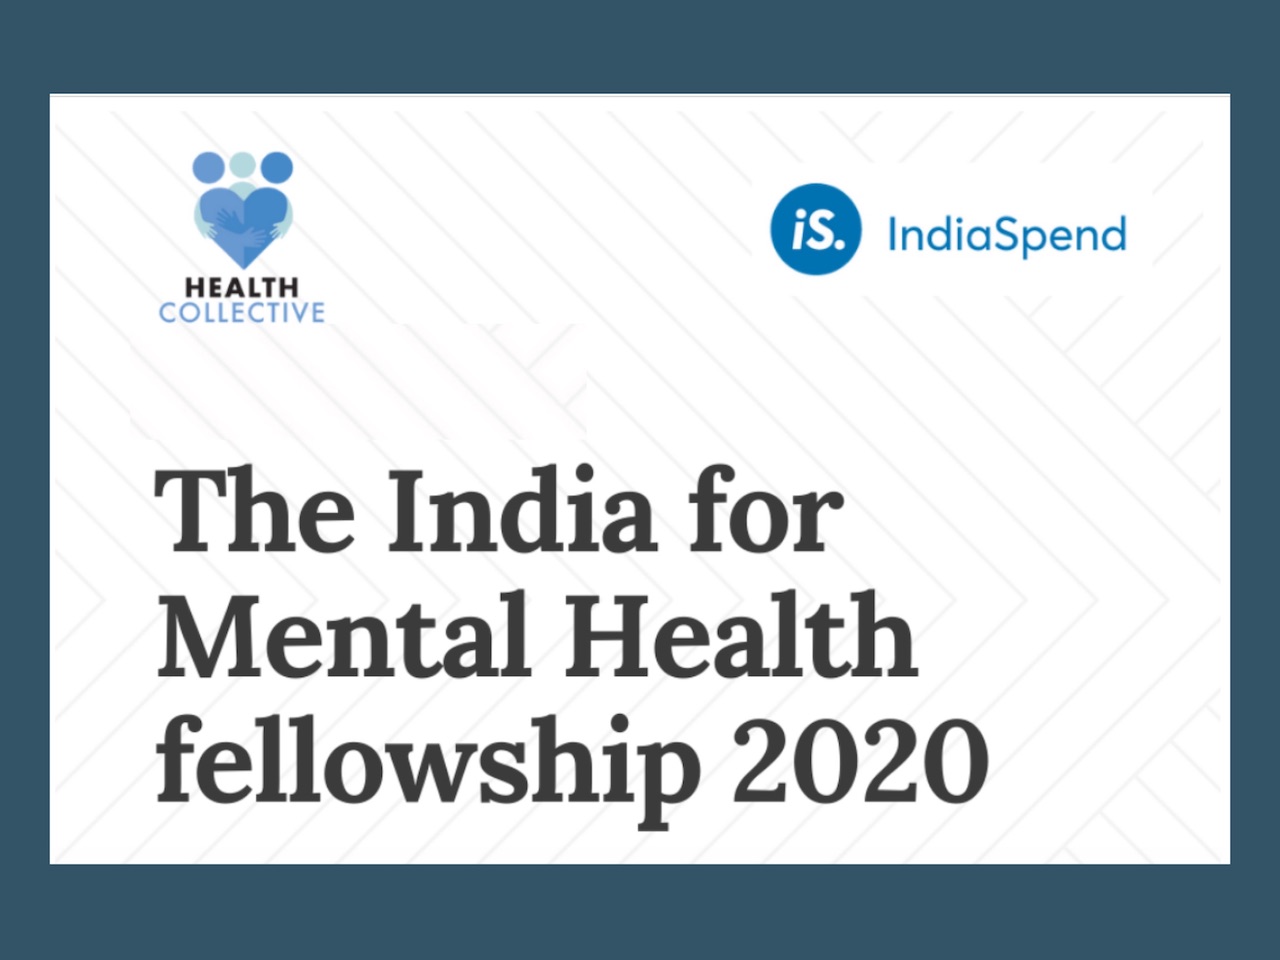 Health Collective and India Spend